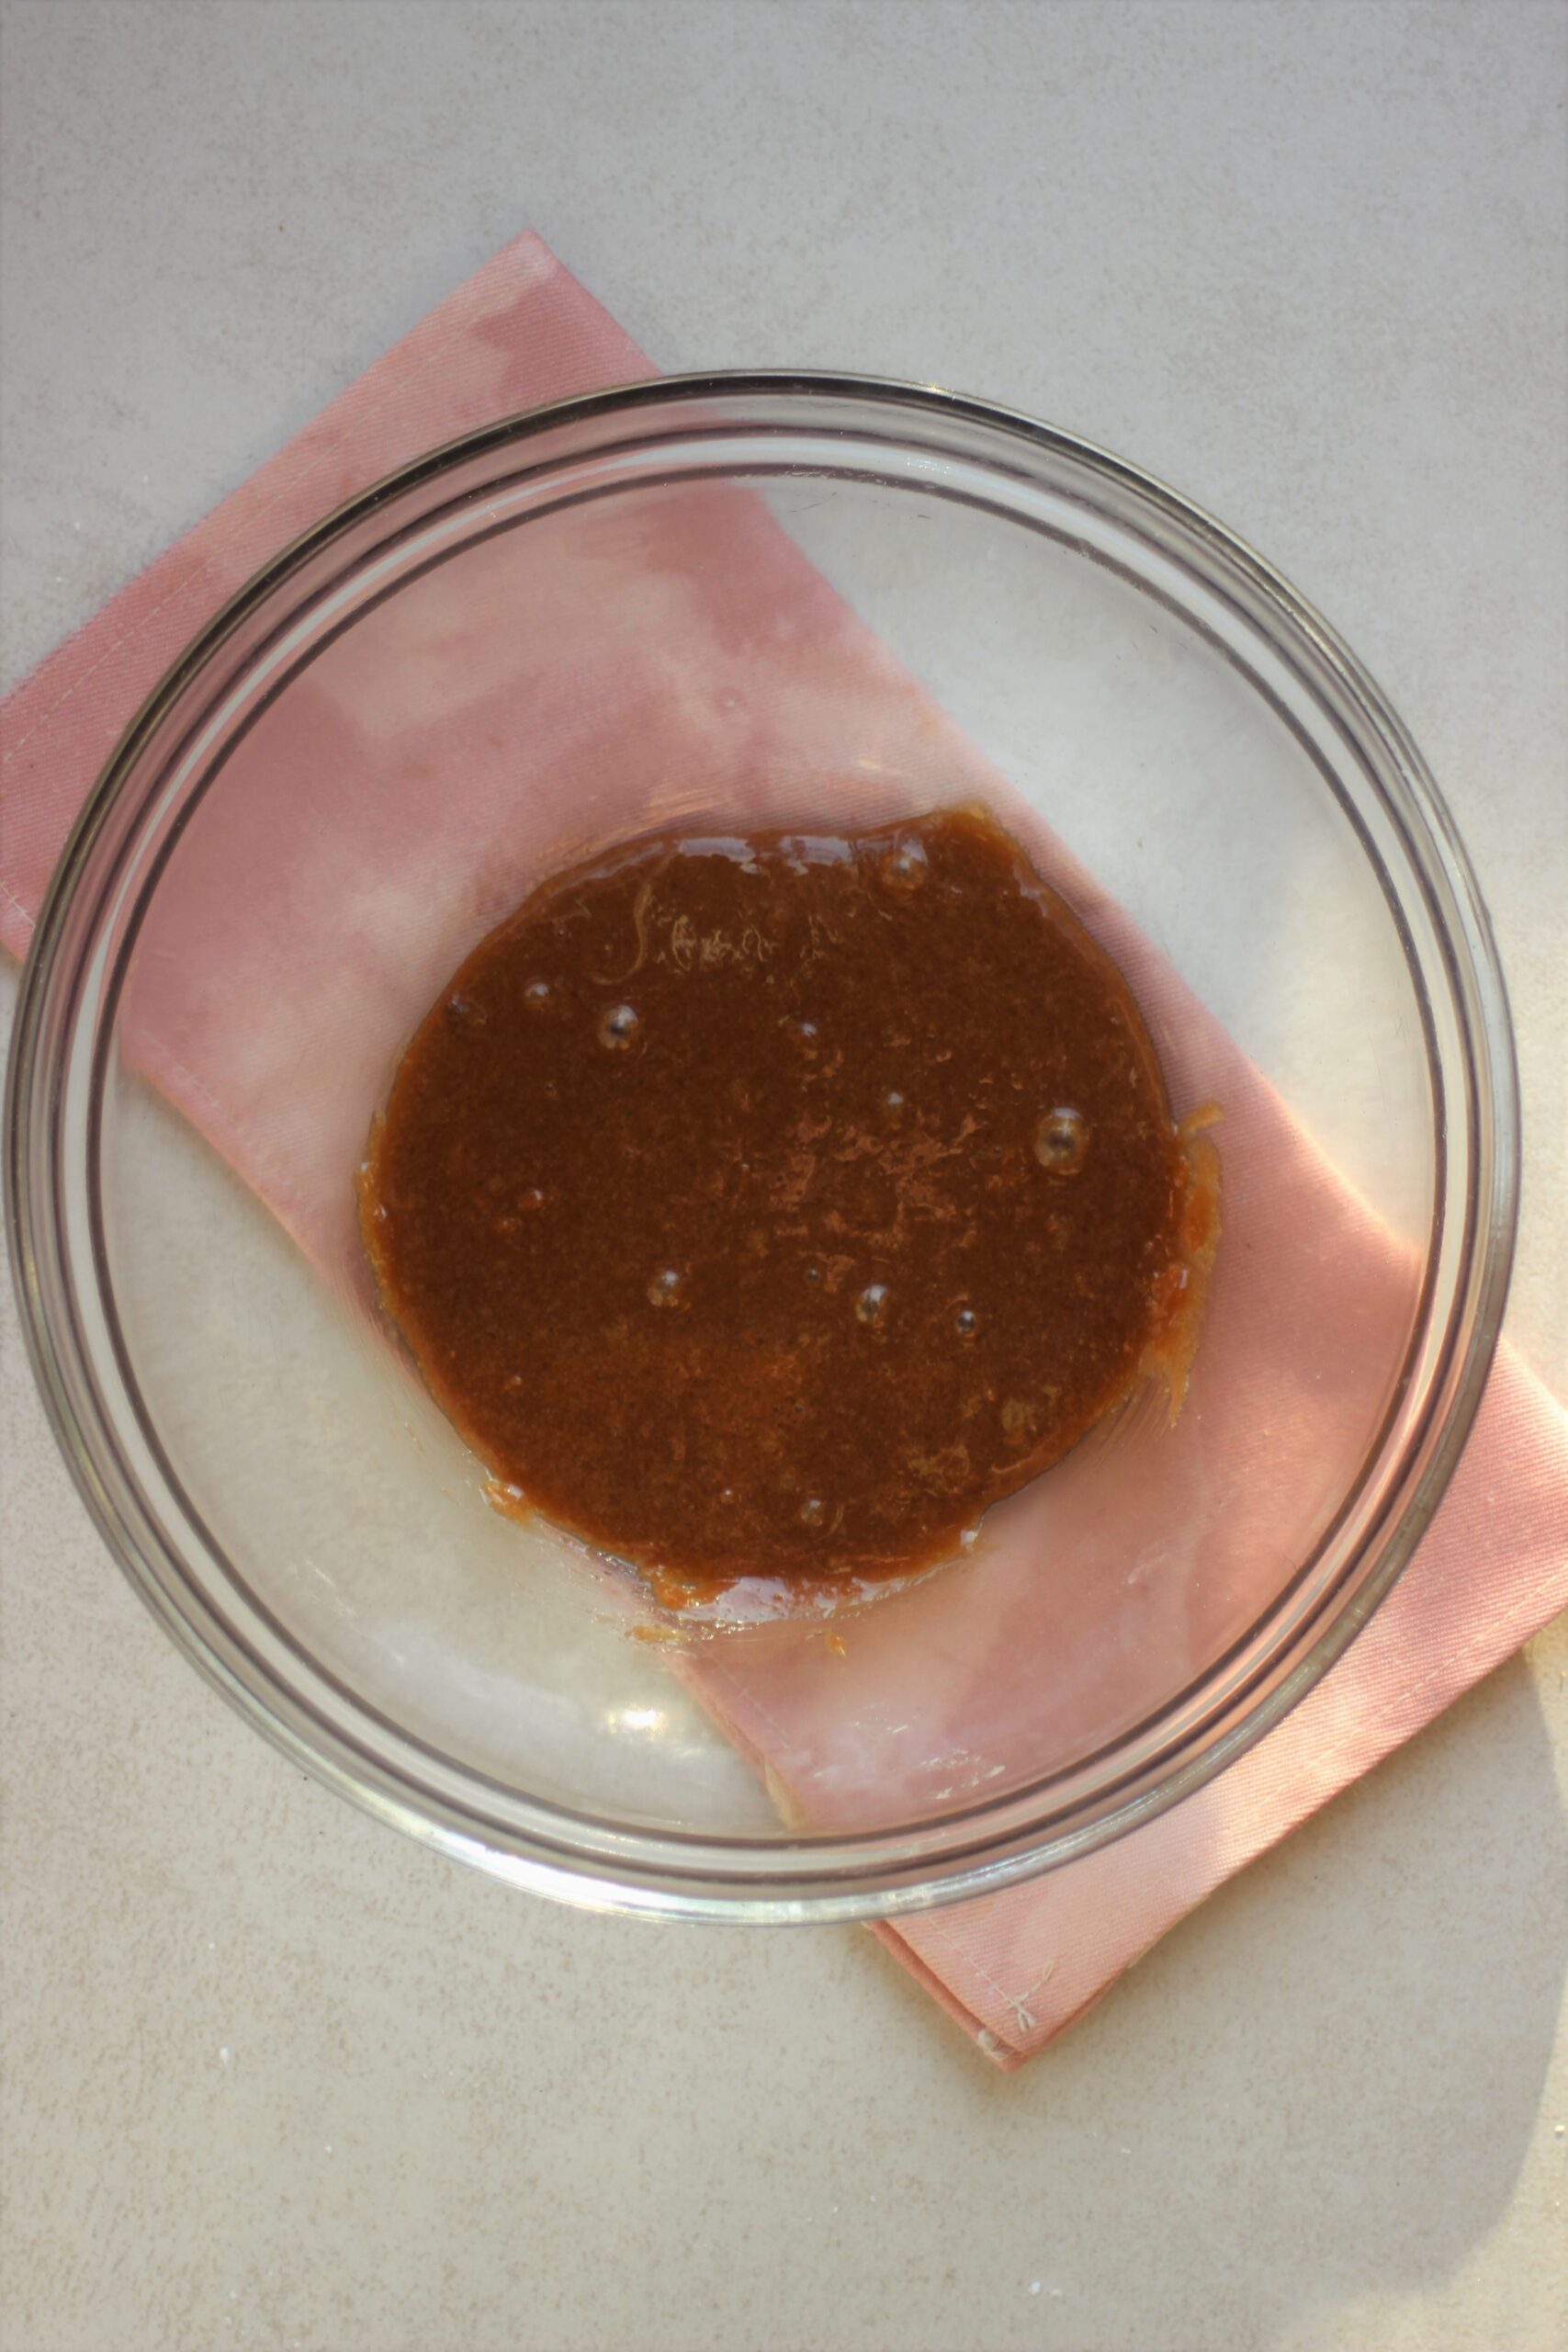 Glass bowl with a brown mixture. Pink napkin under the bowl.